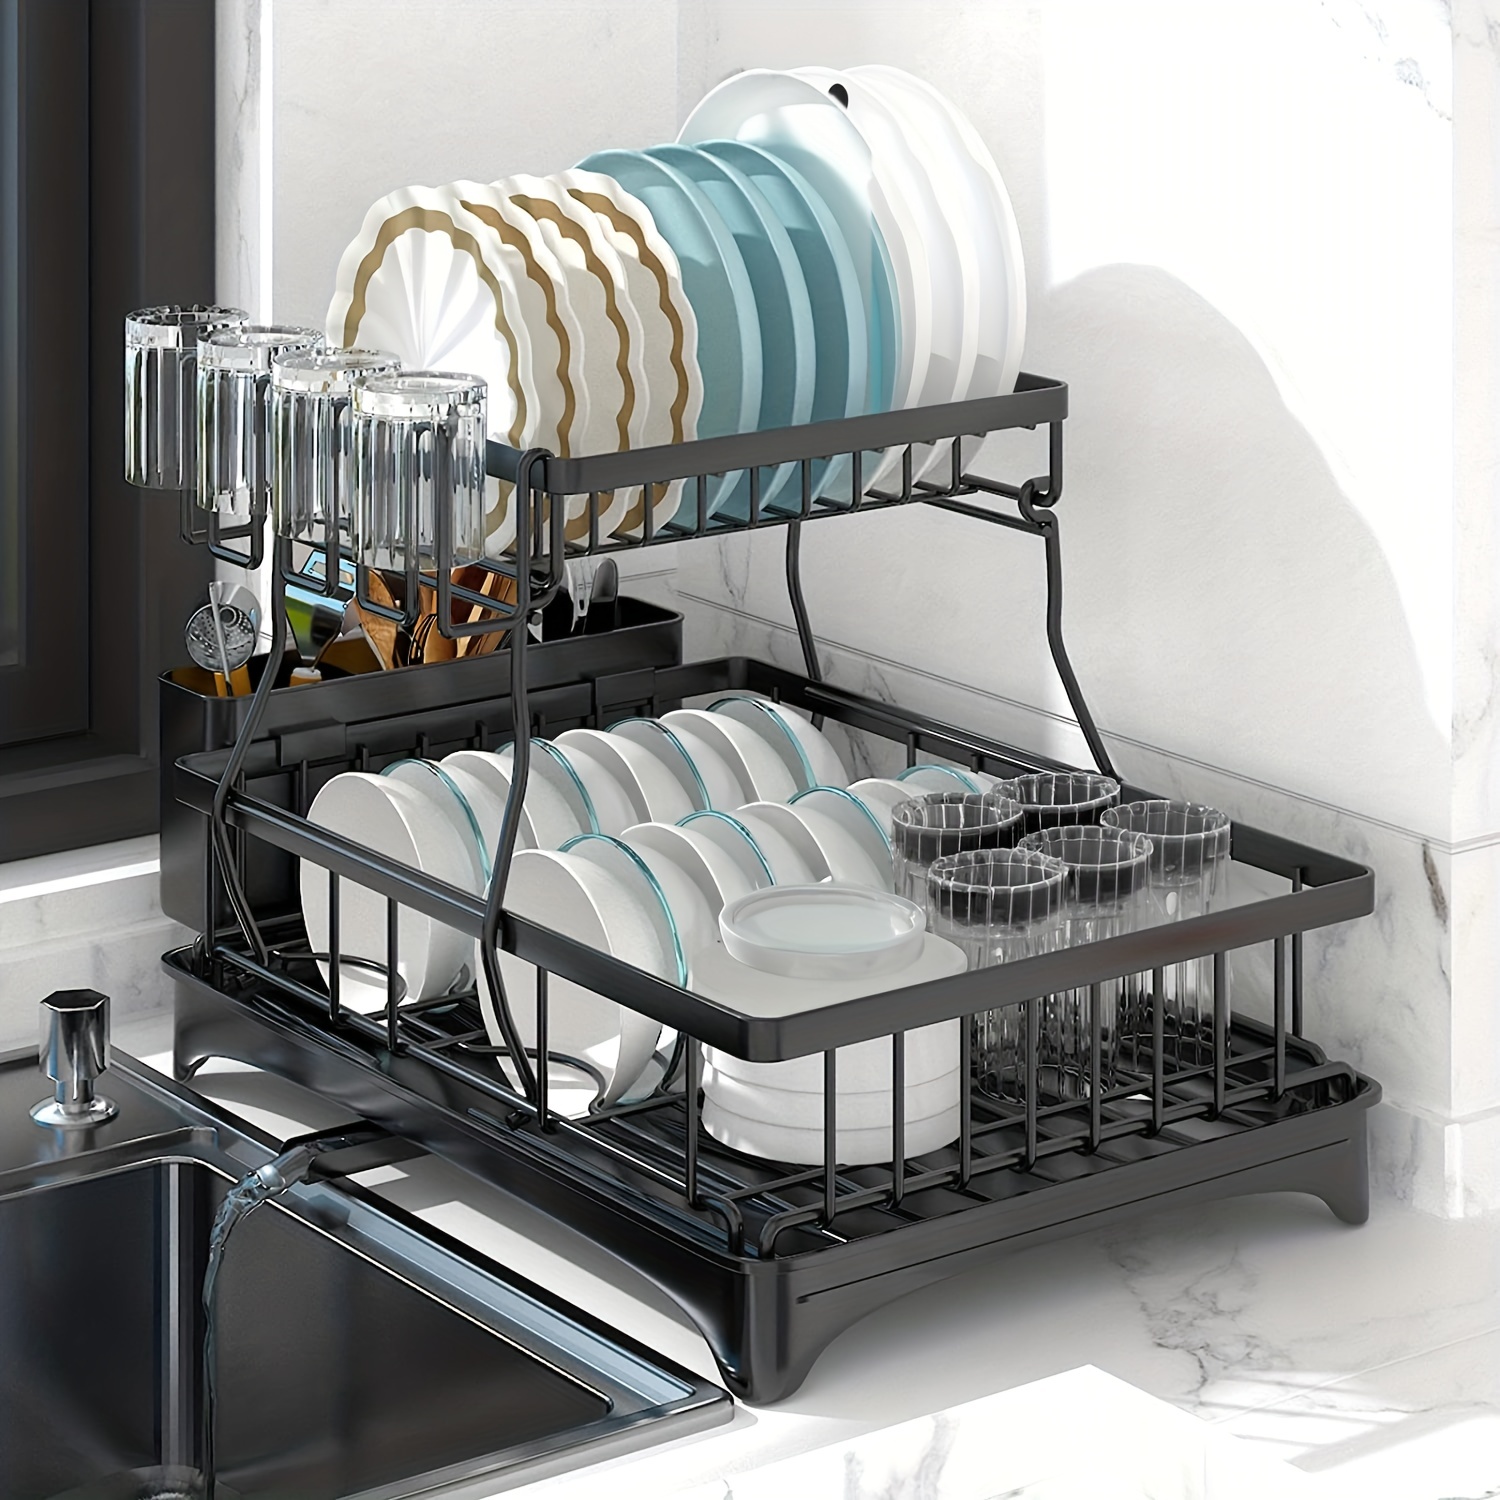 Dish Drying Rack For Kitchen Counter 2 Tier, Dish Drying Rack With  Drainboard Dish,kitchen Dish Dryer Rack With Cover For Dishes Plates  Storage(17.8in